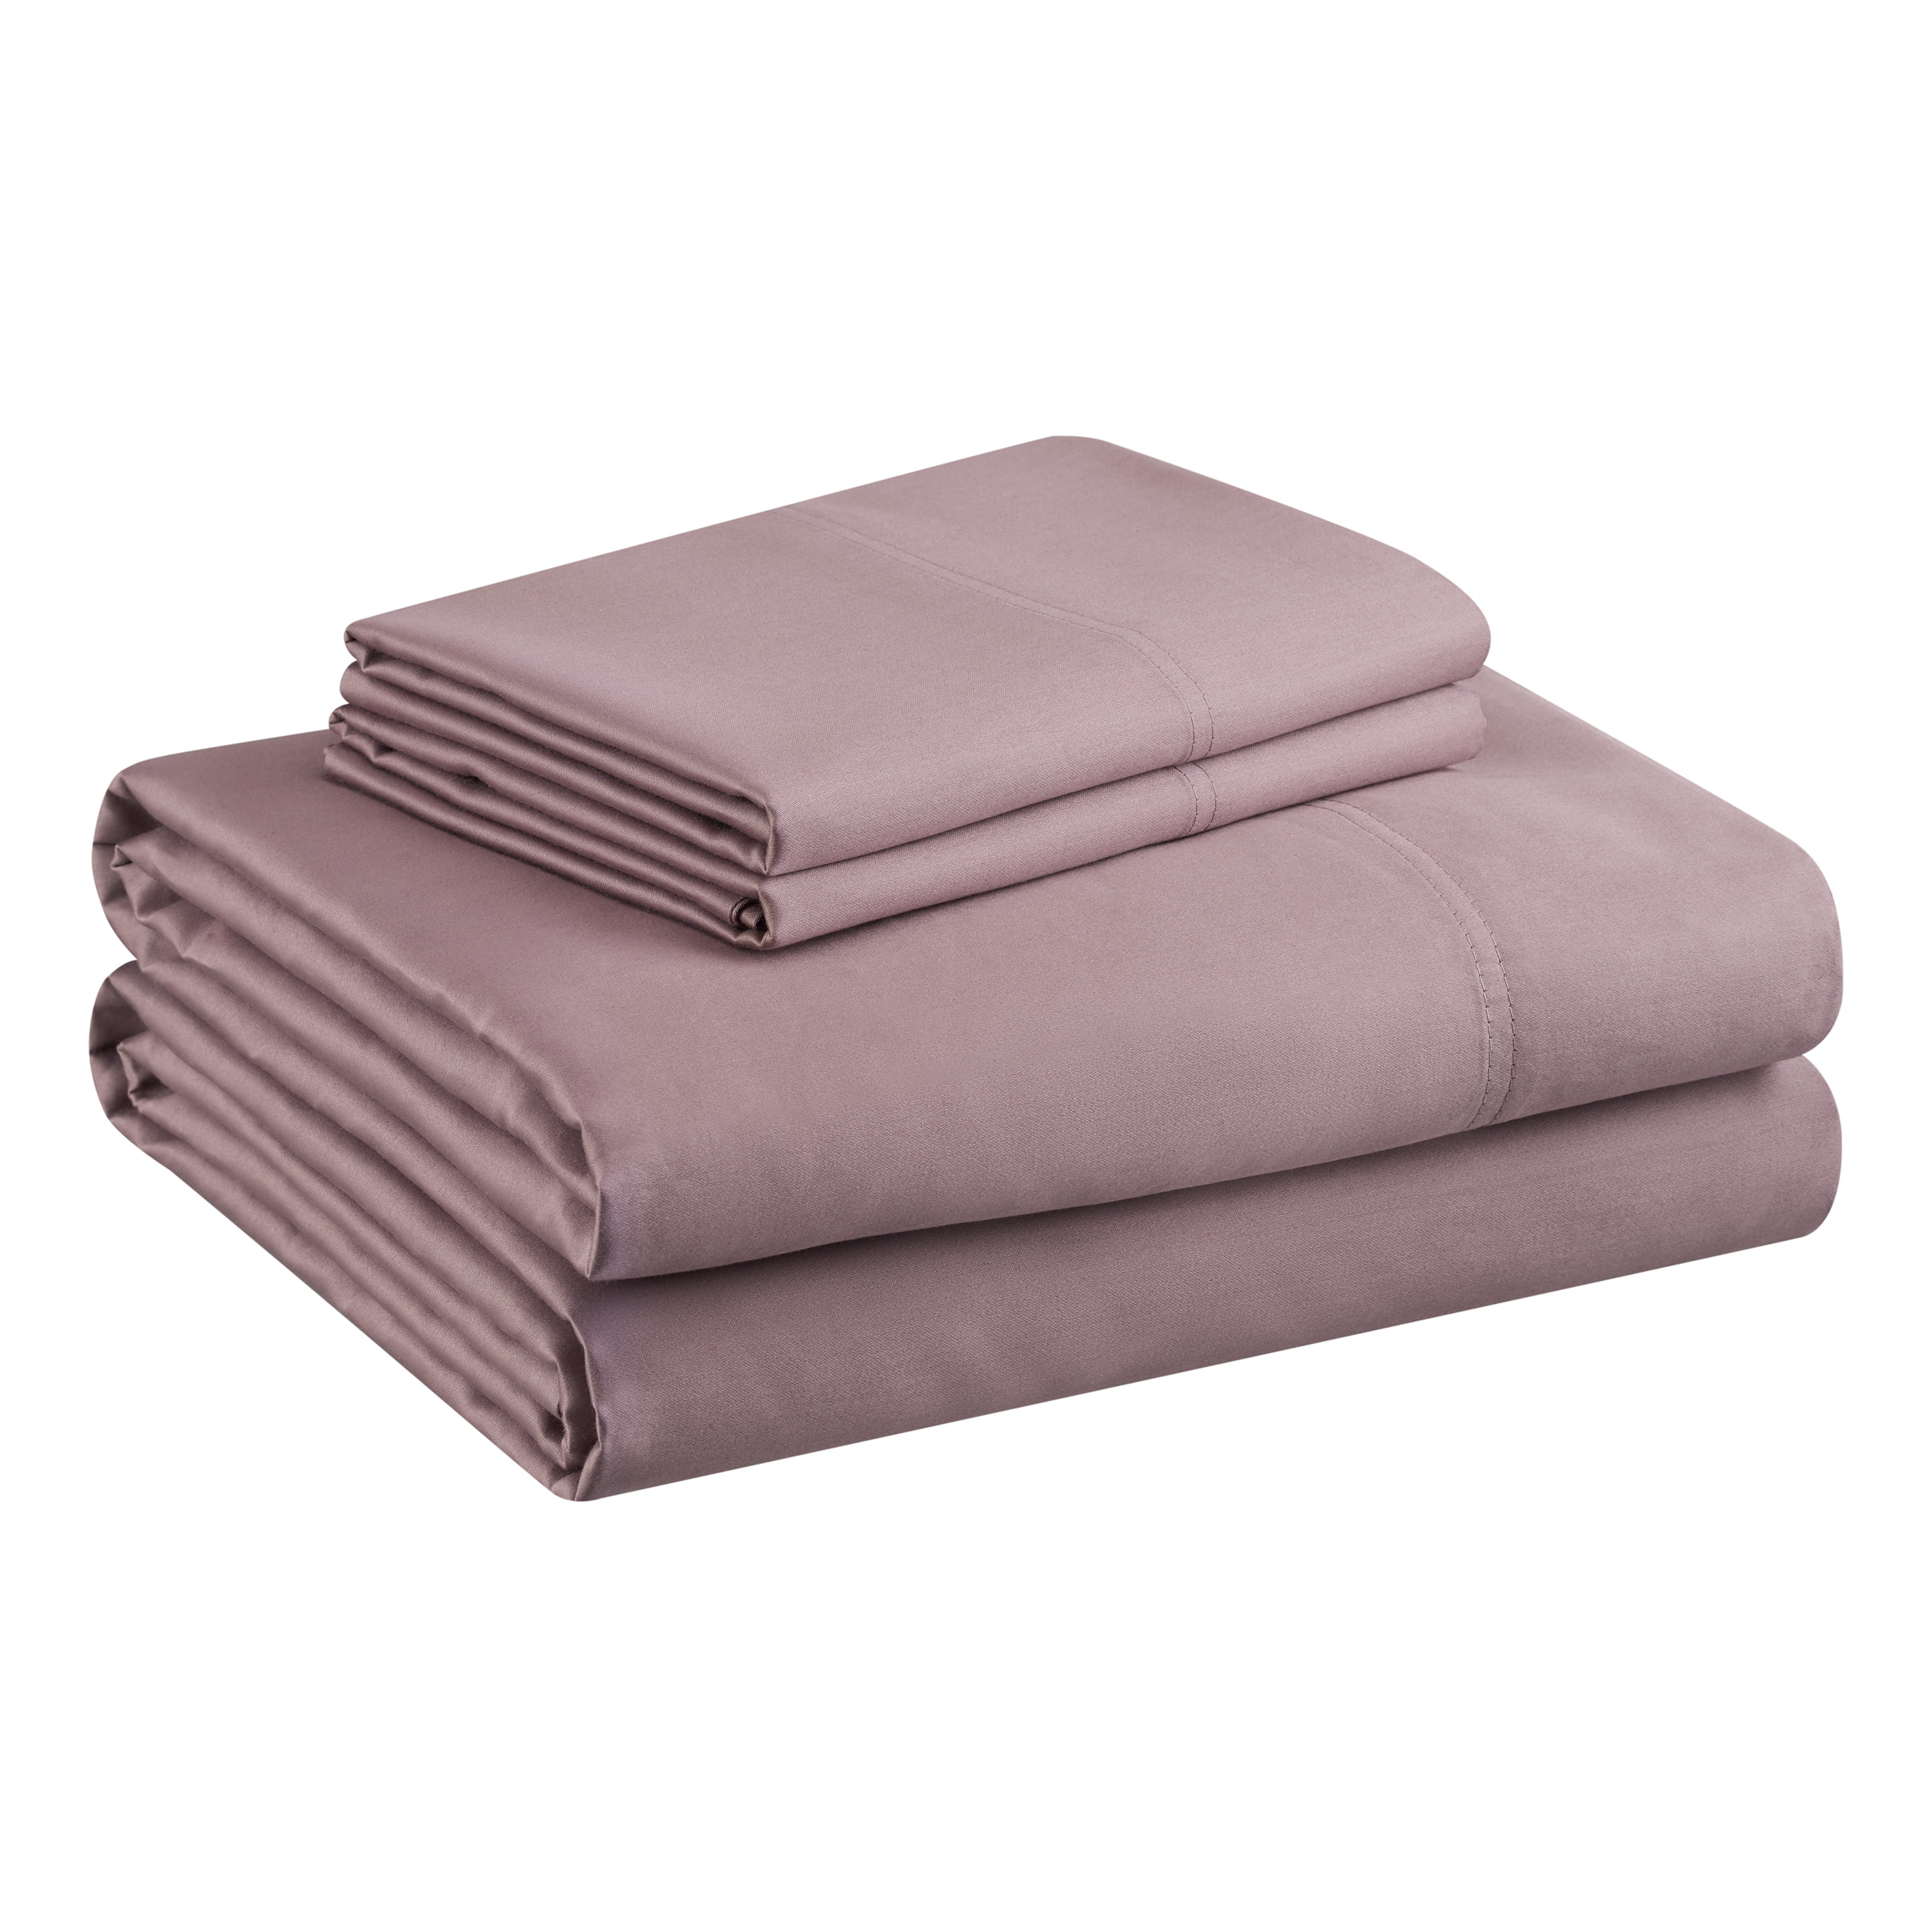 100% POLY COTTON QUALITY THREAD COUNT FITTED SHEET BEDDING UK SIZE 